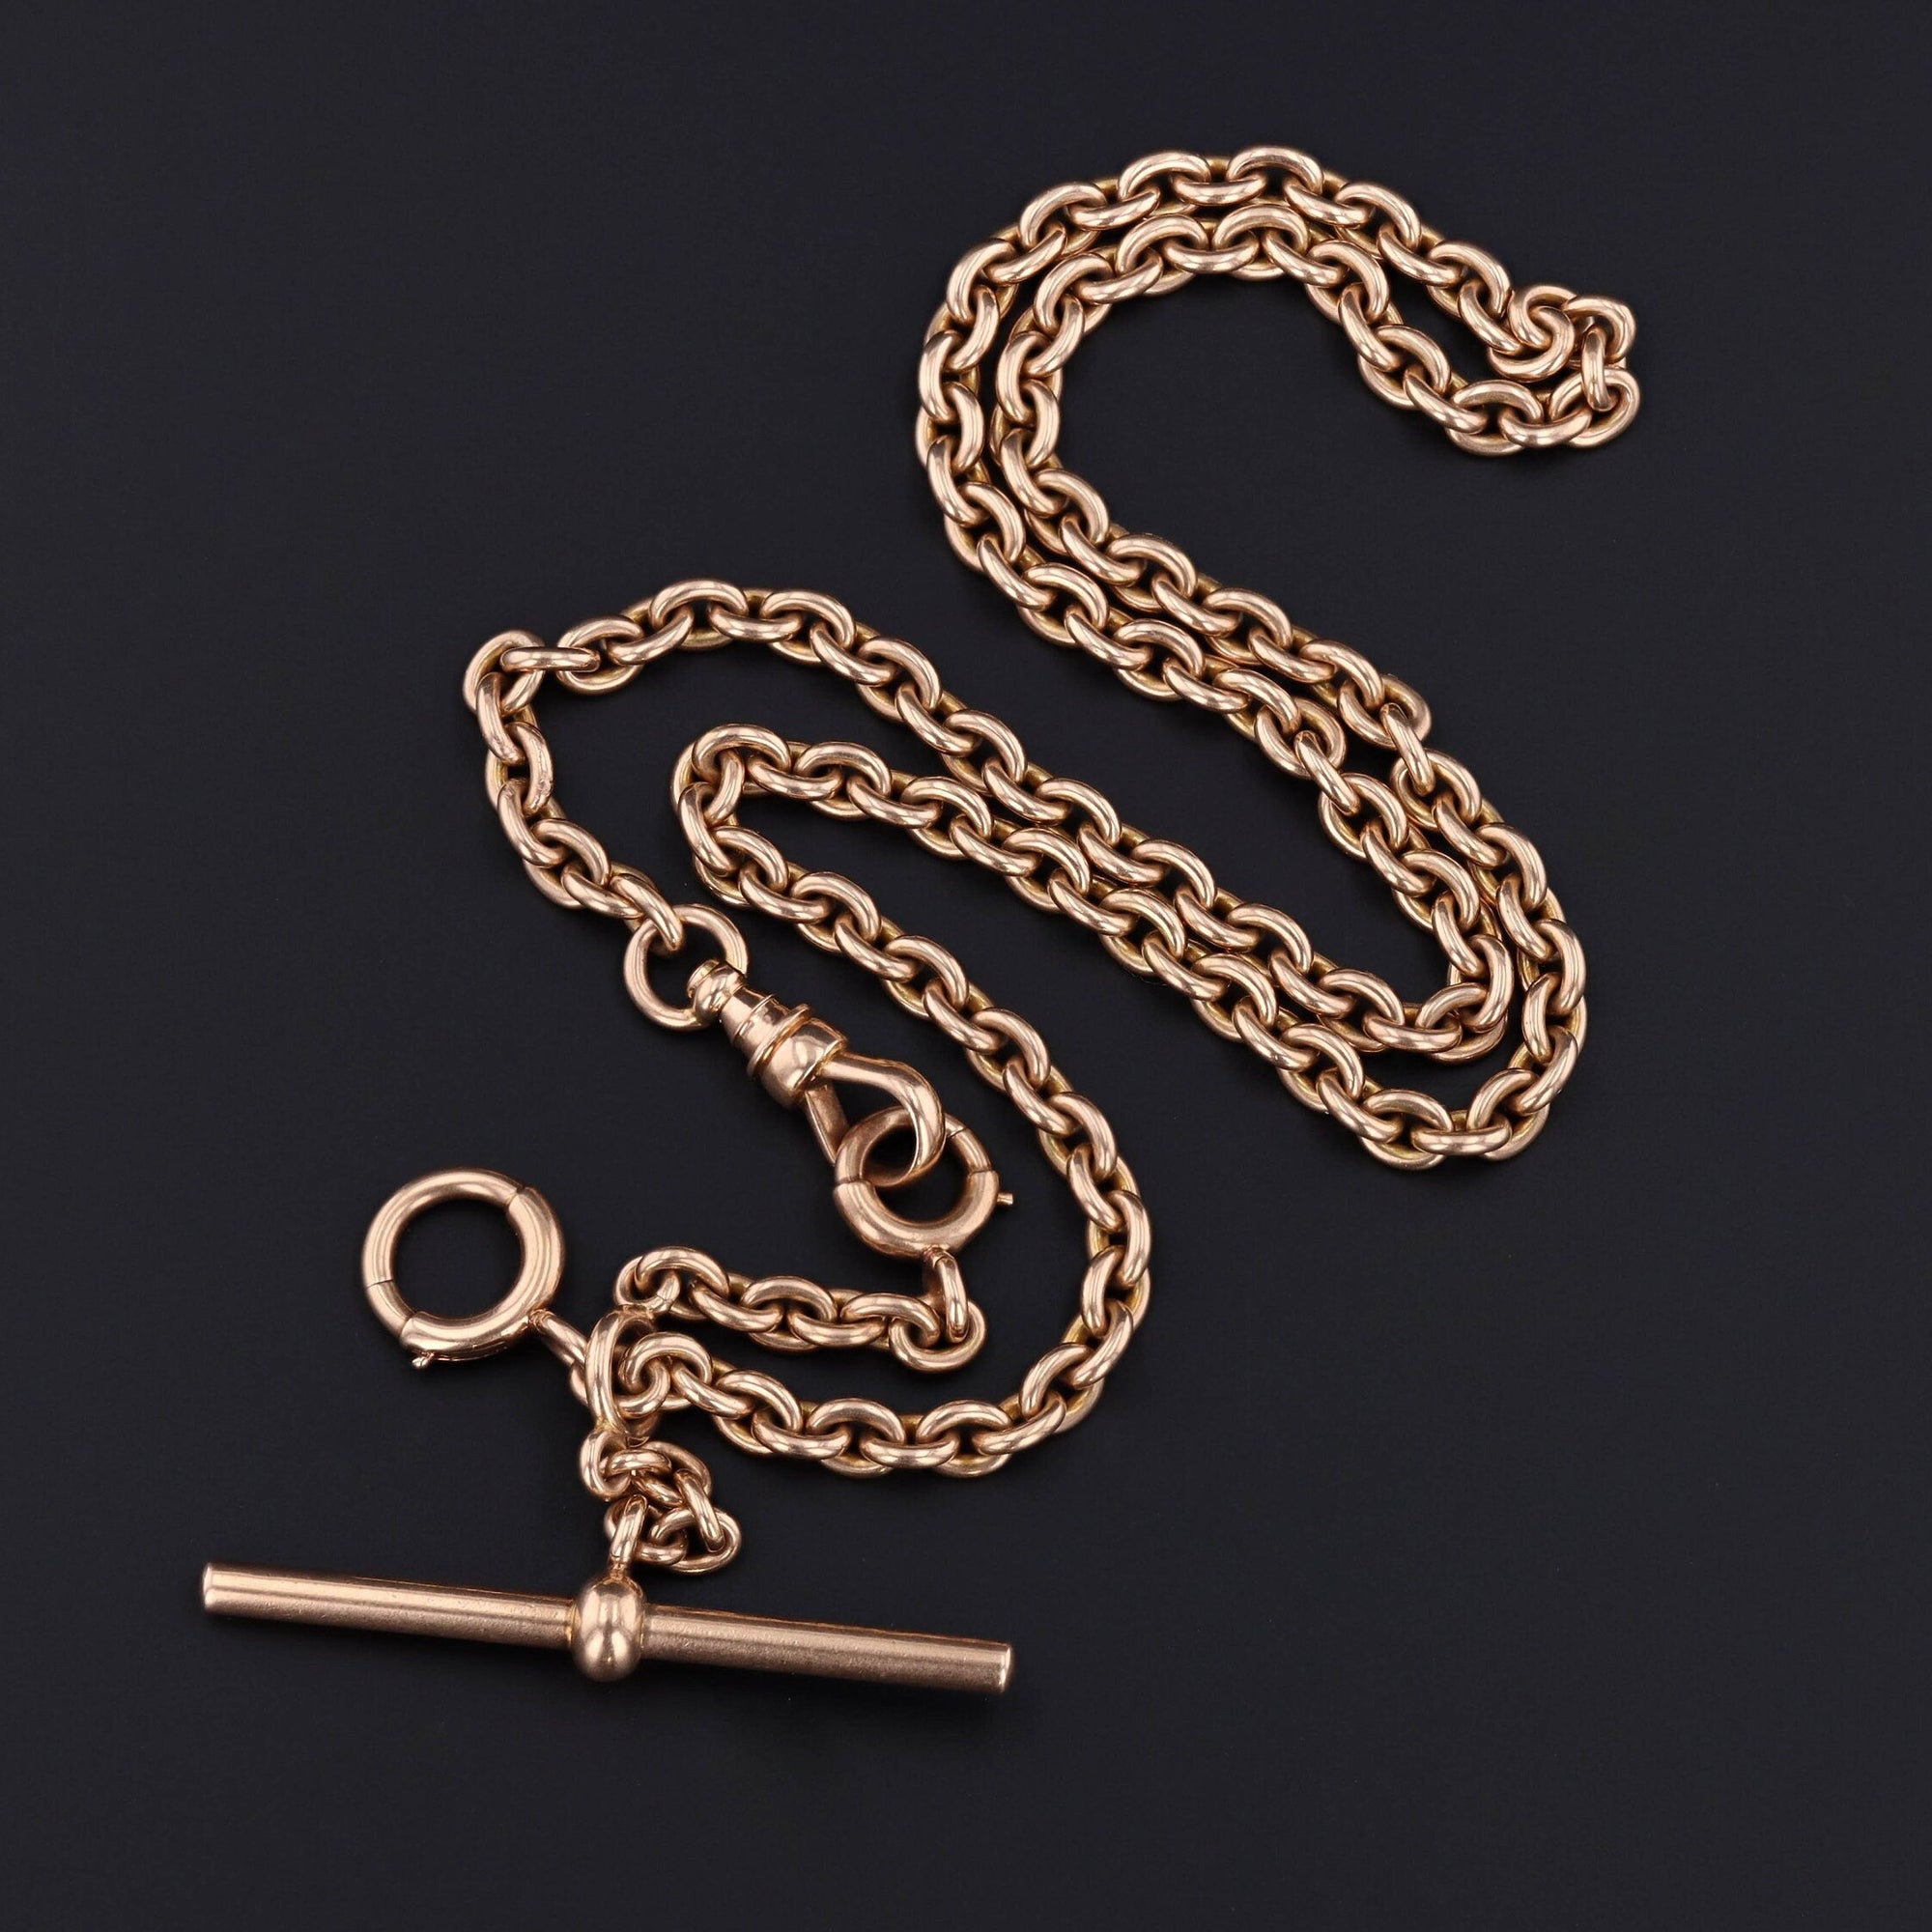 Antique Watch Chain Necklace | Chunky 14k Gold Watch Chain 